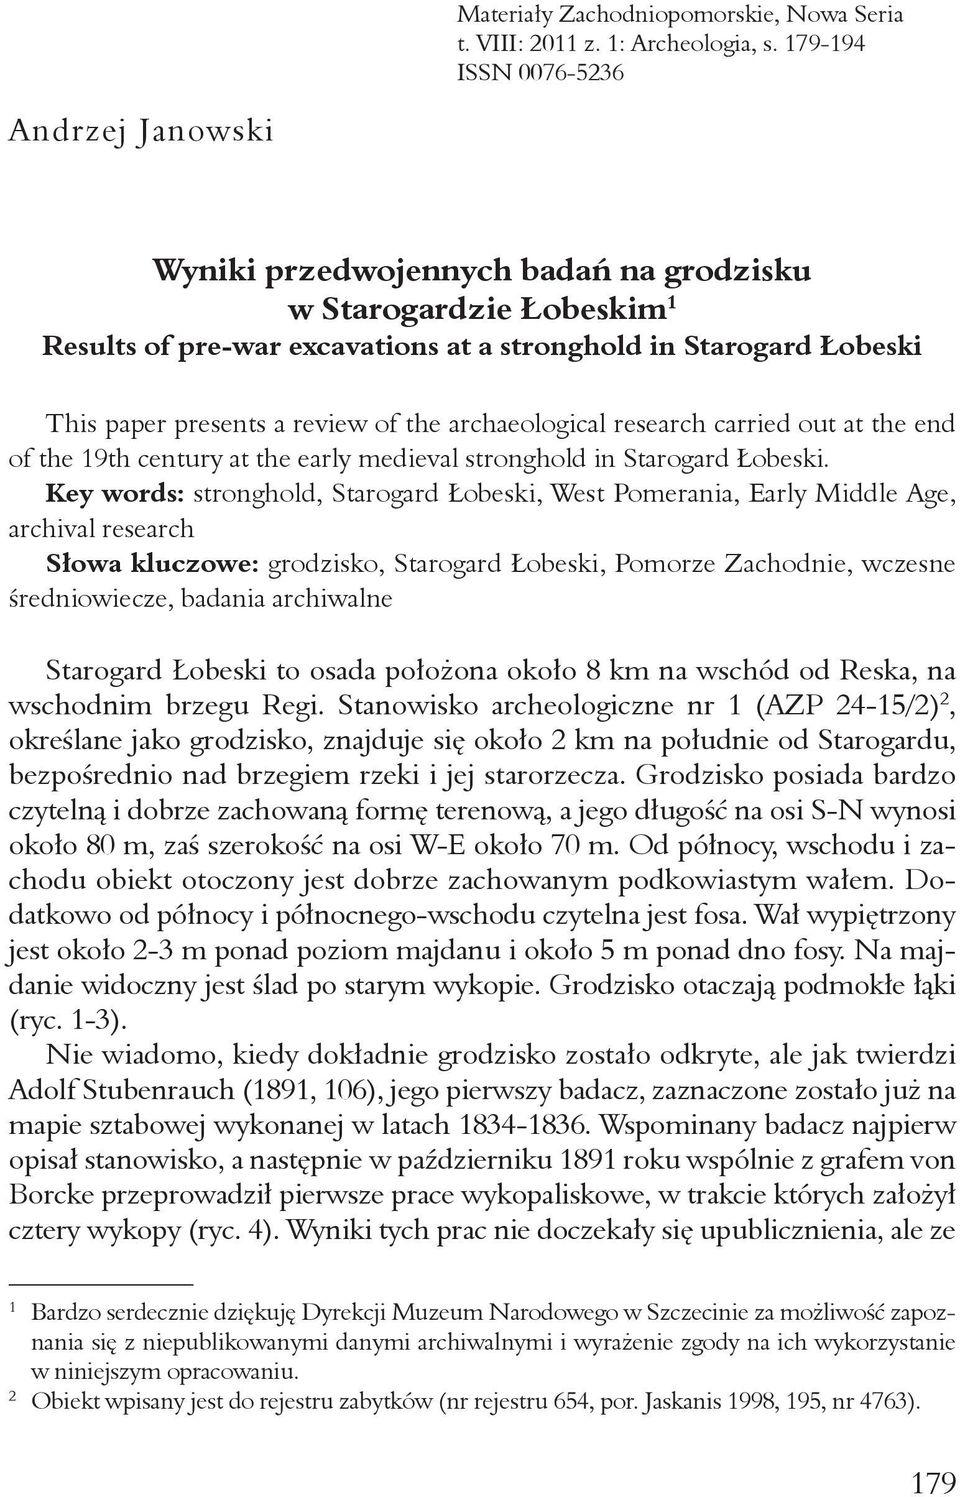 review of the archaeological research carried out at the end of the 19th century at the early medieval stronghold in Starogard Łobeski.